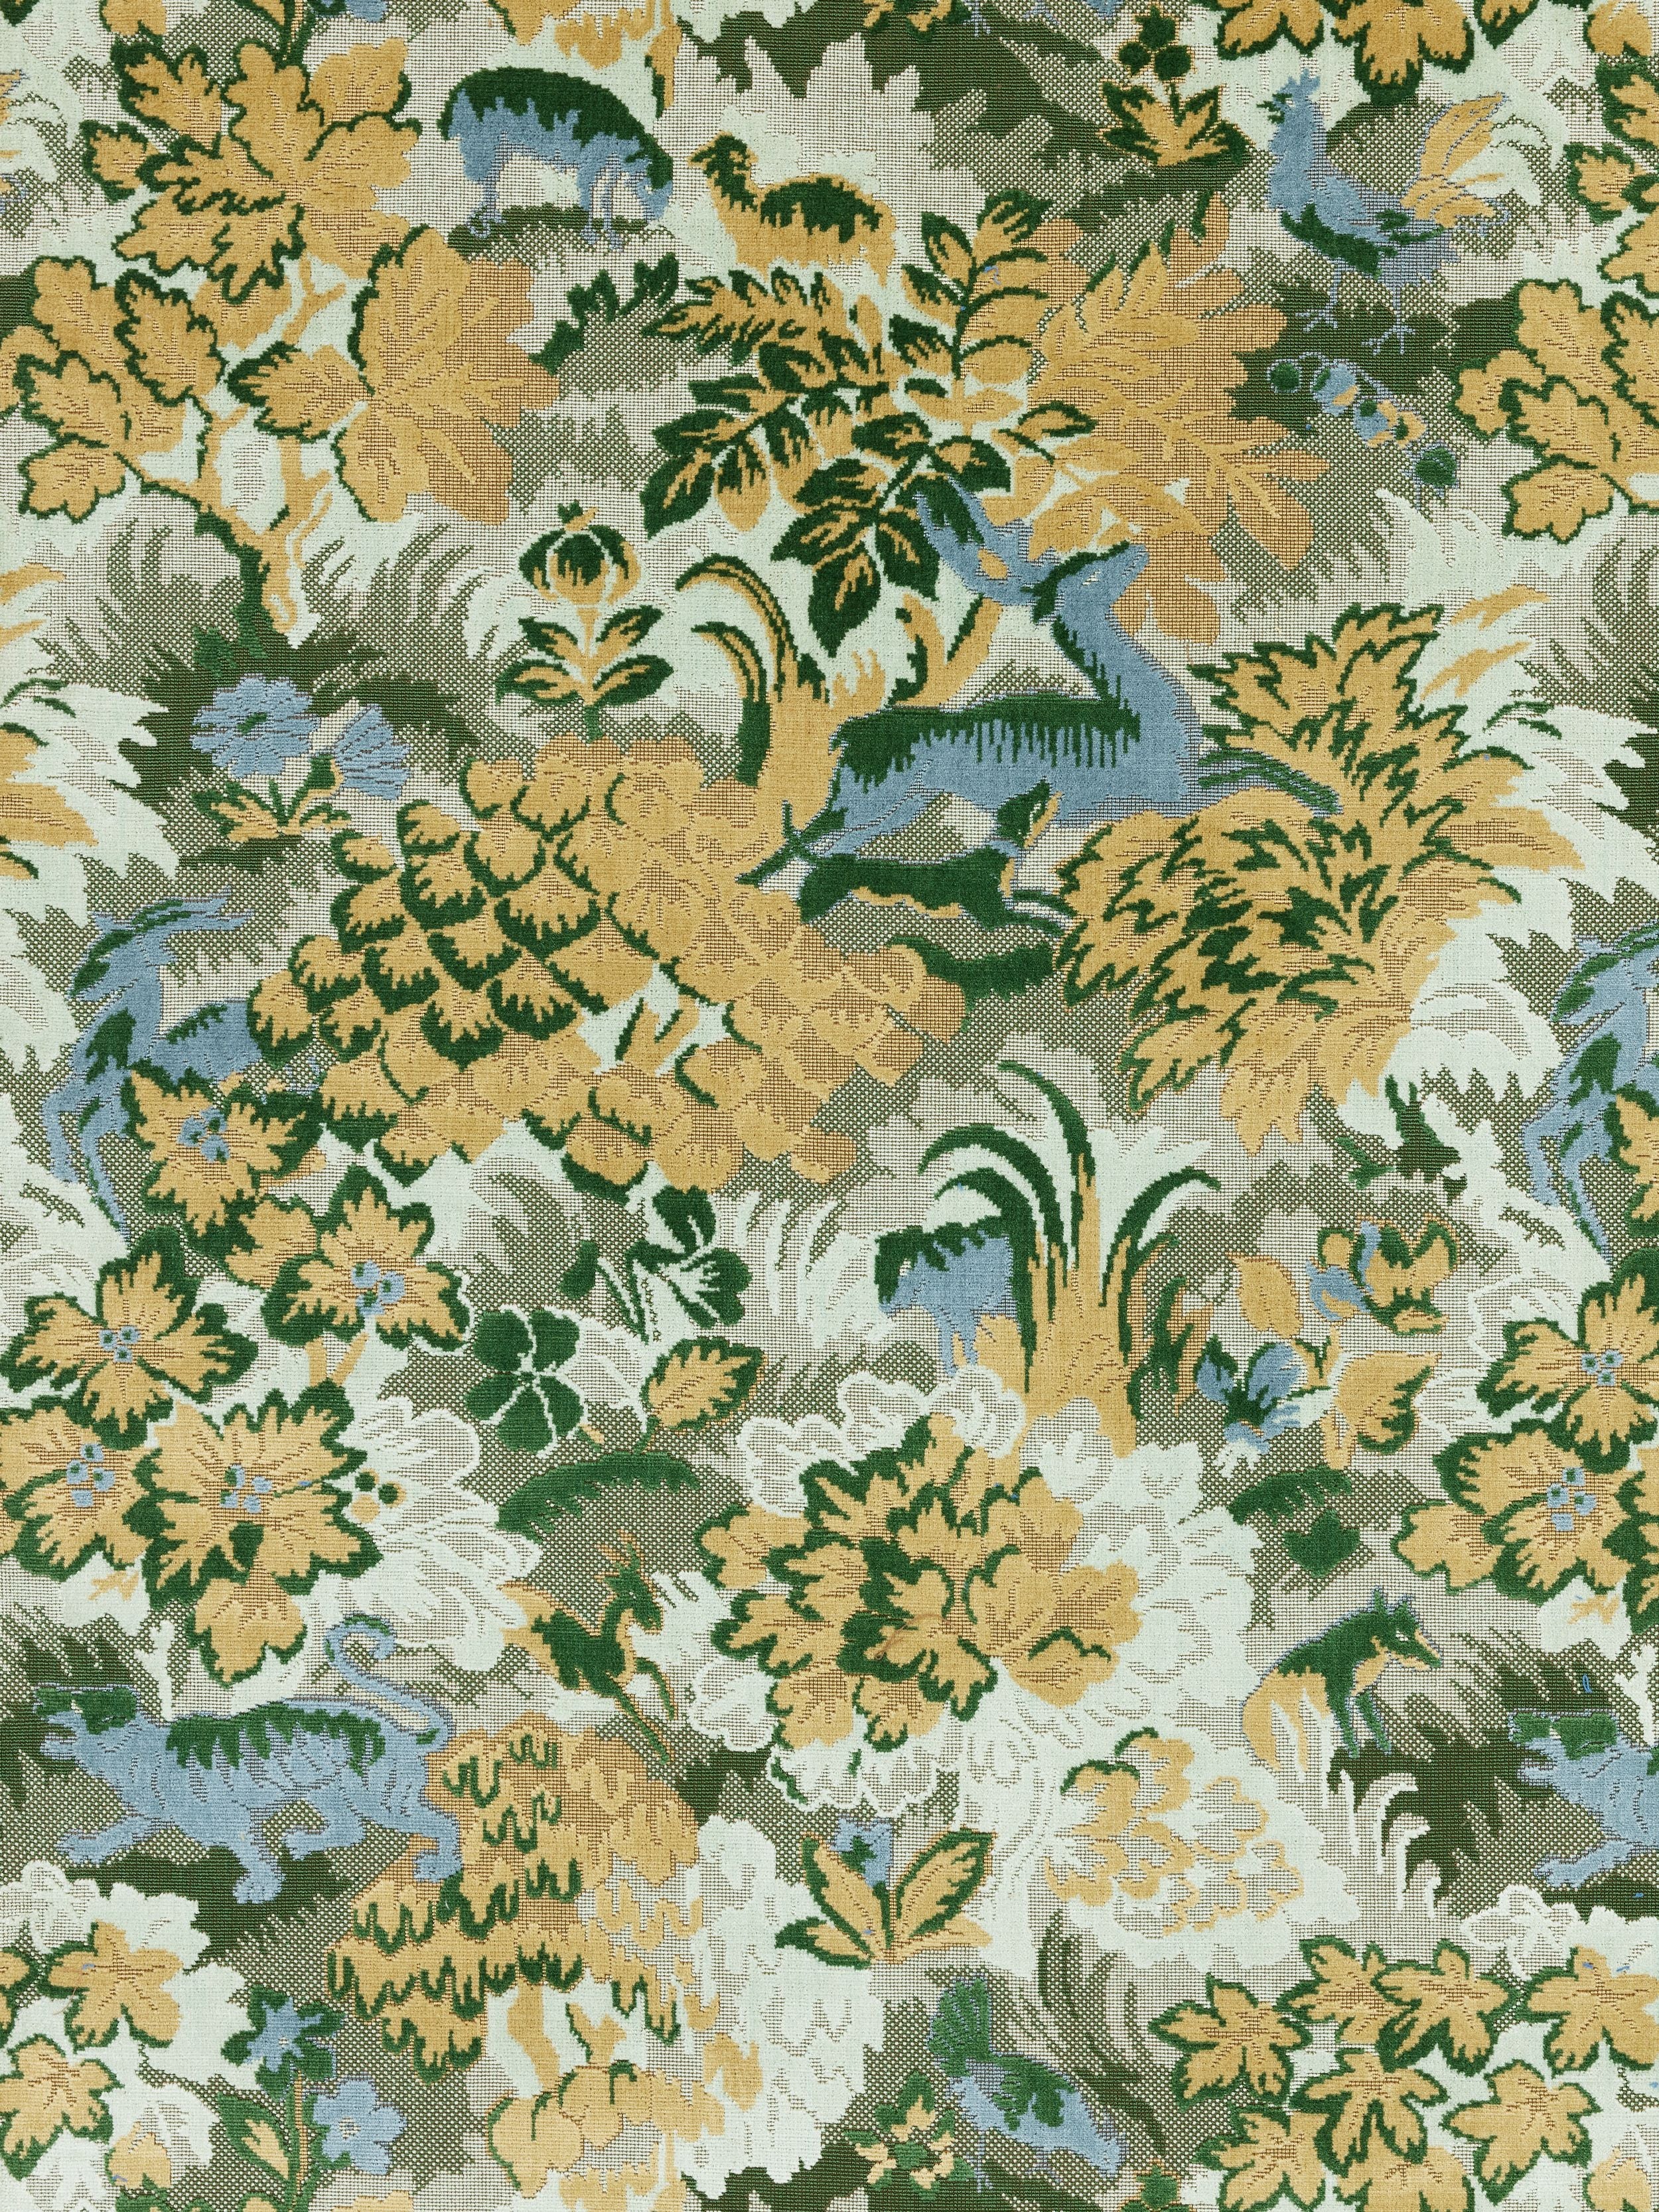 Tails Tale fabric in forest color - pattern number M1 00020264 - by Scalamandre in the Old World Weavers collection